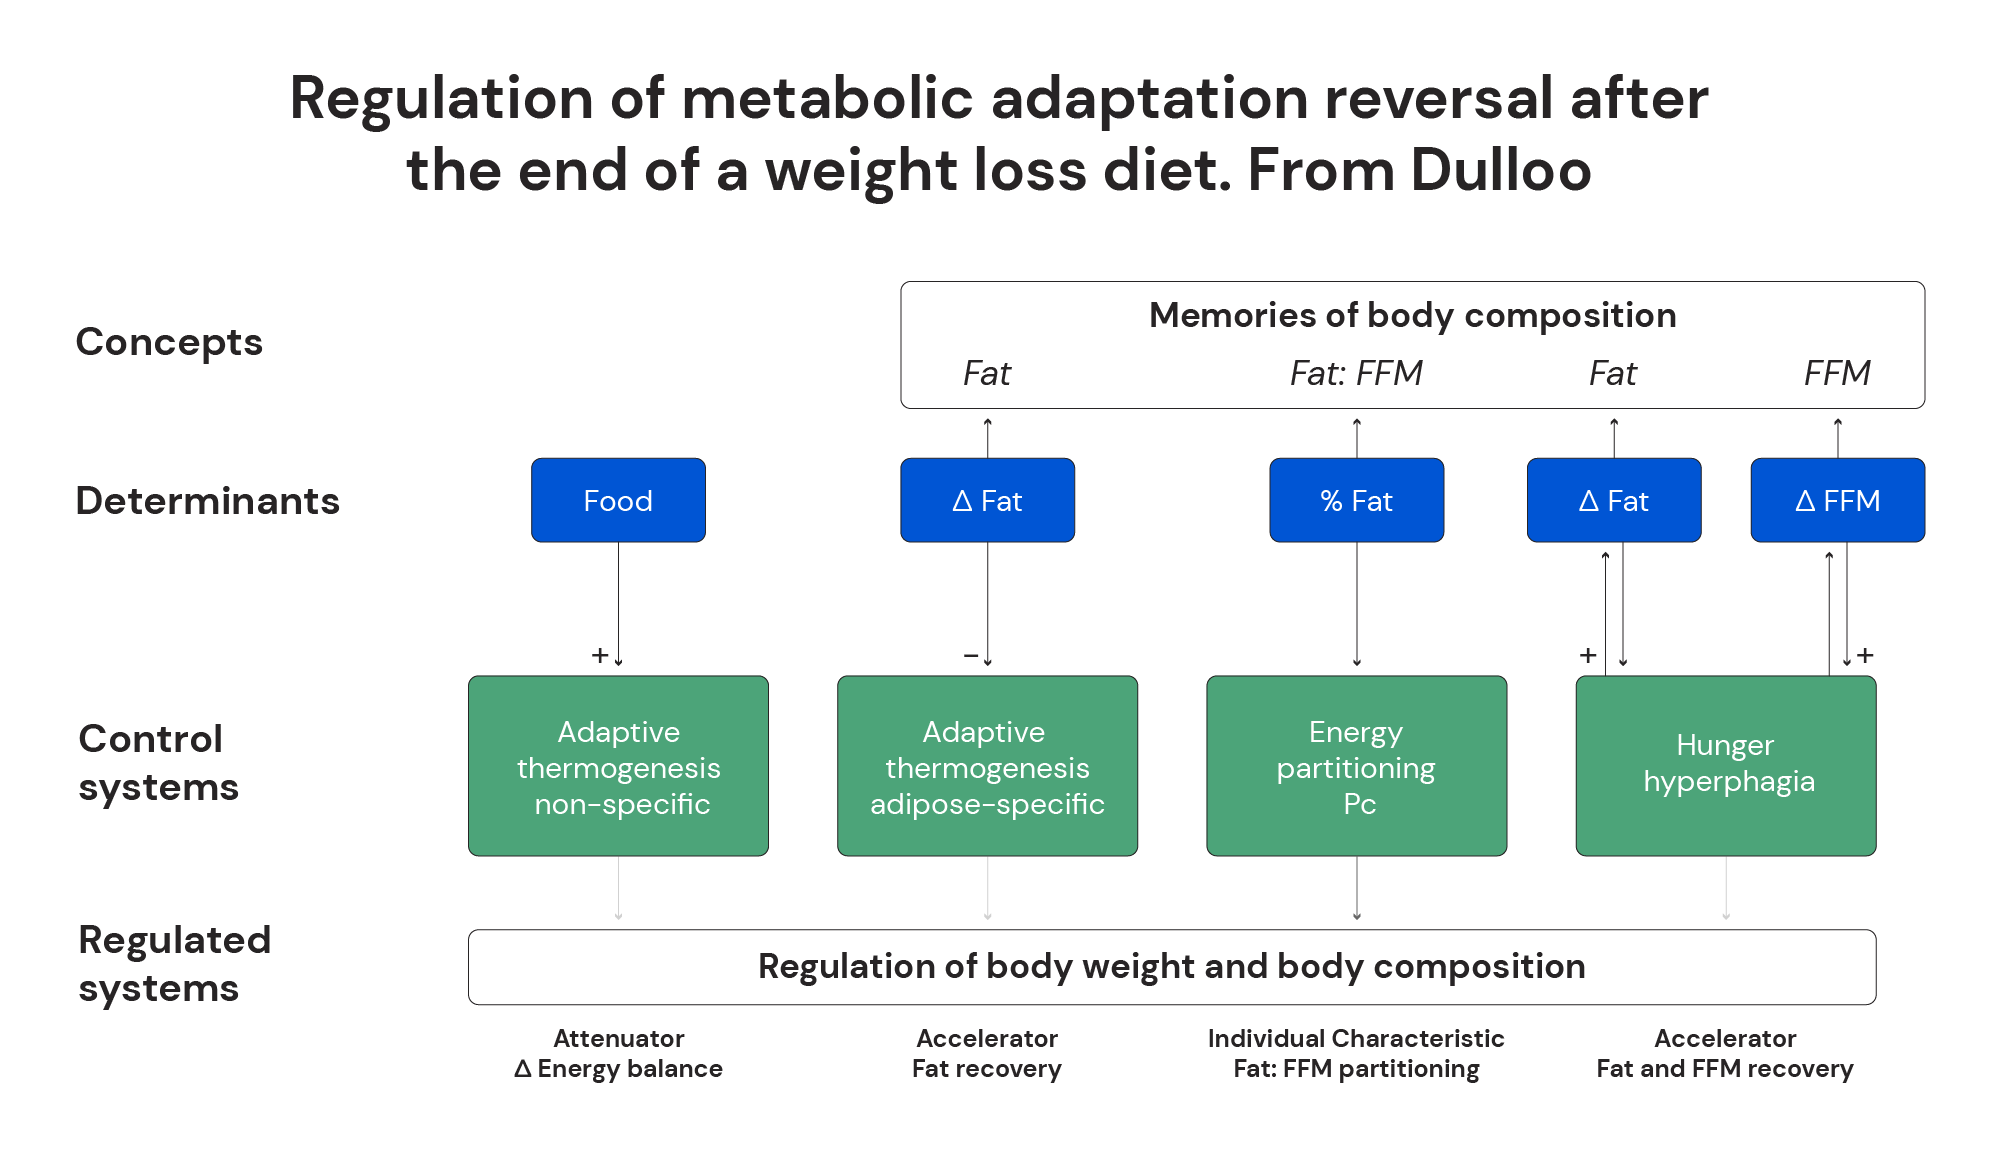 Regulation of metabolic adaptation reversal after the end of a weight loss diet